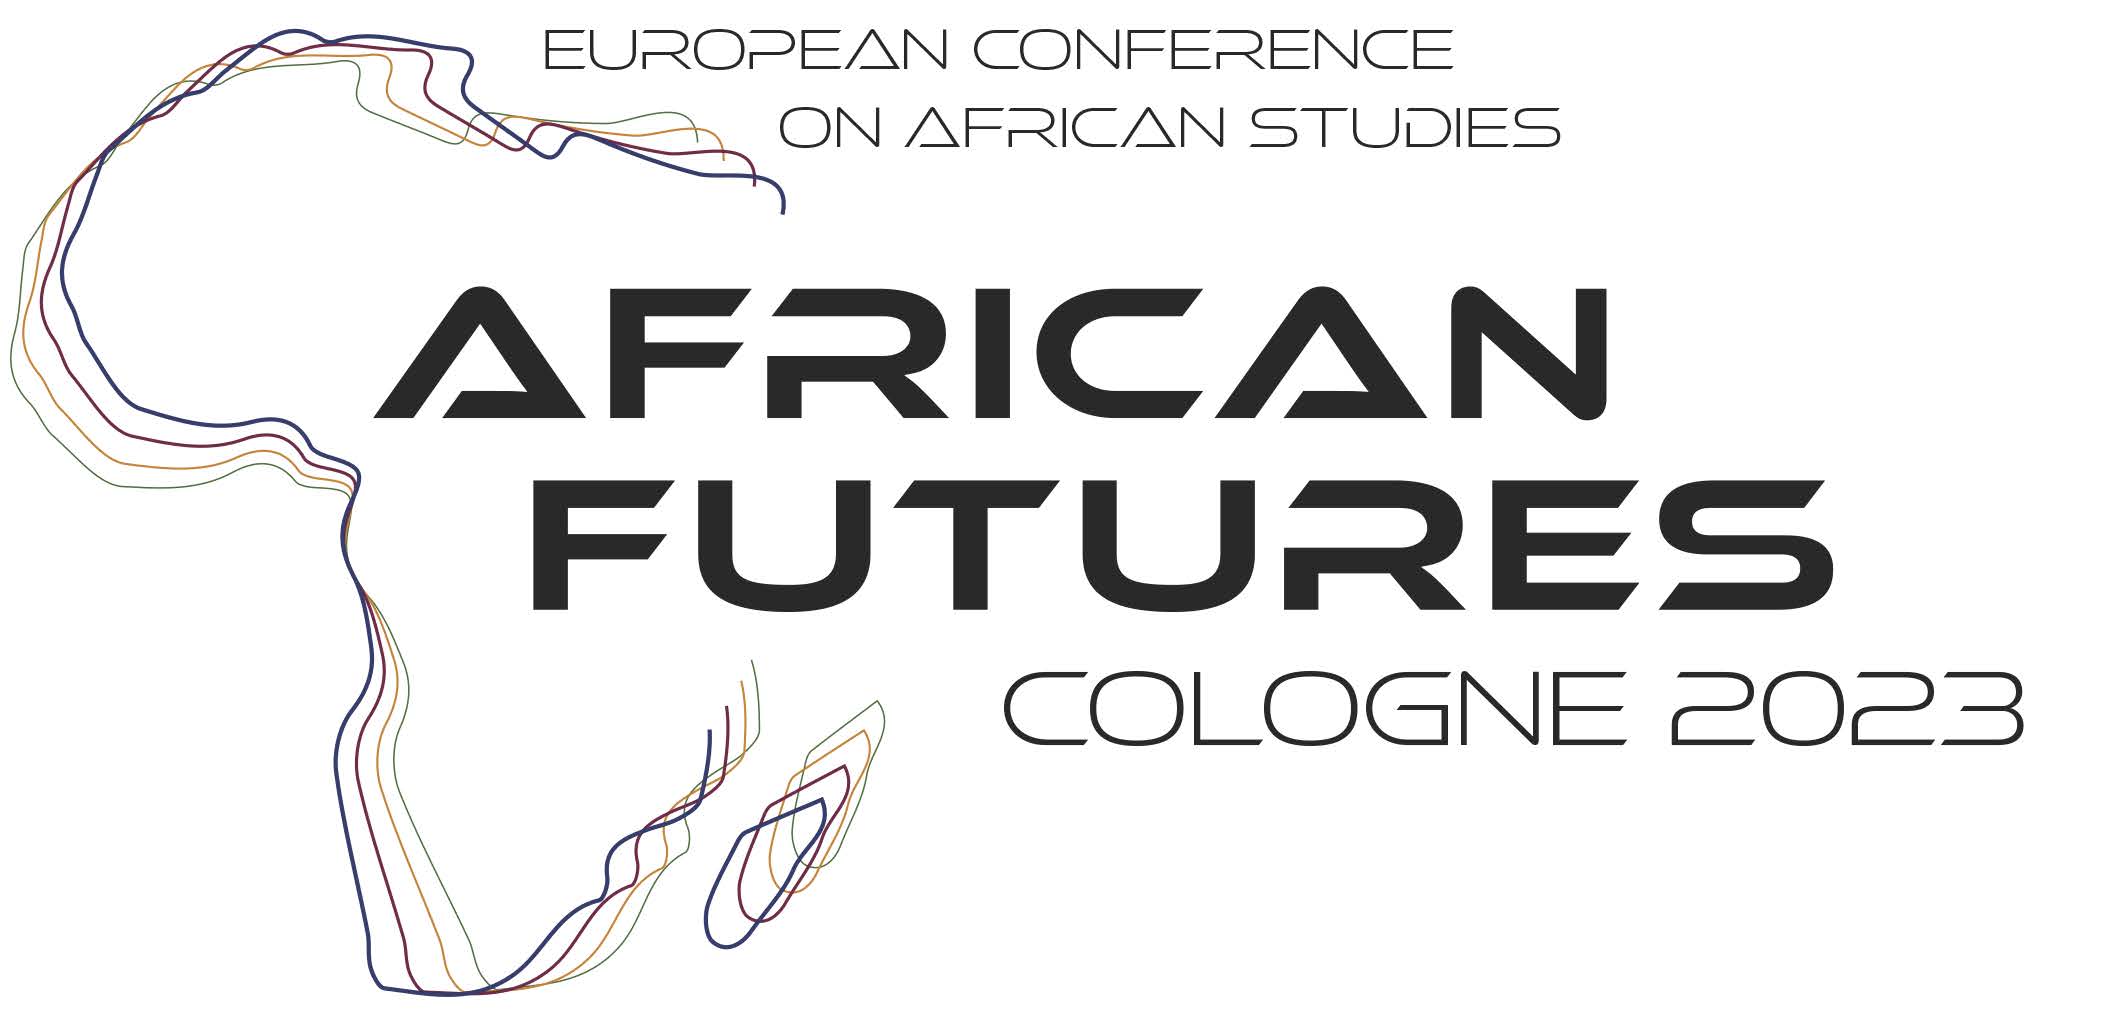 The Logo of ECAS Conference 2023